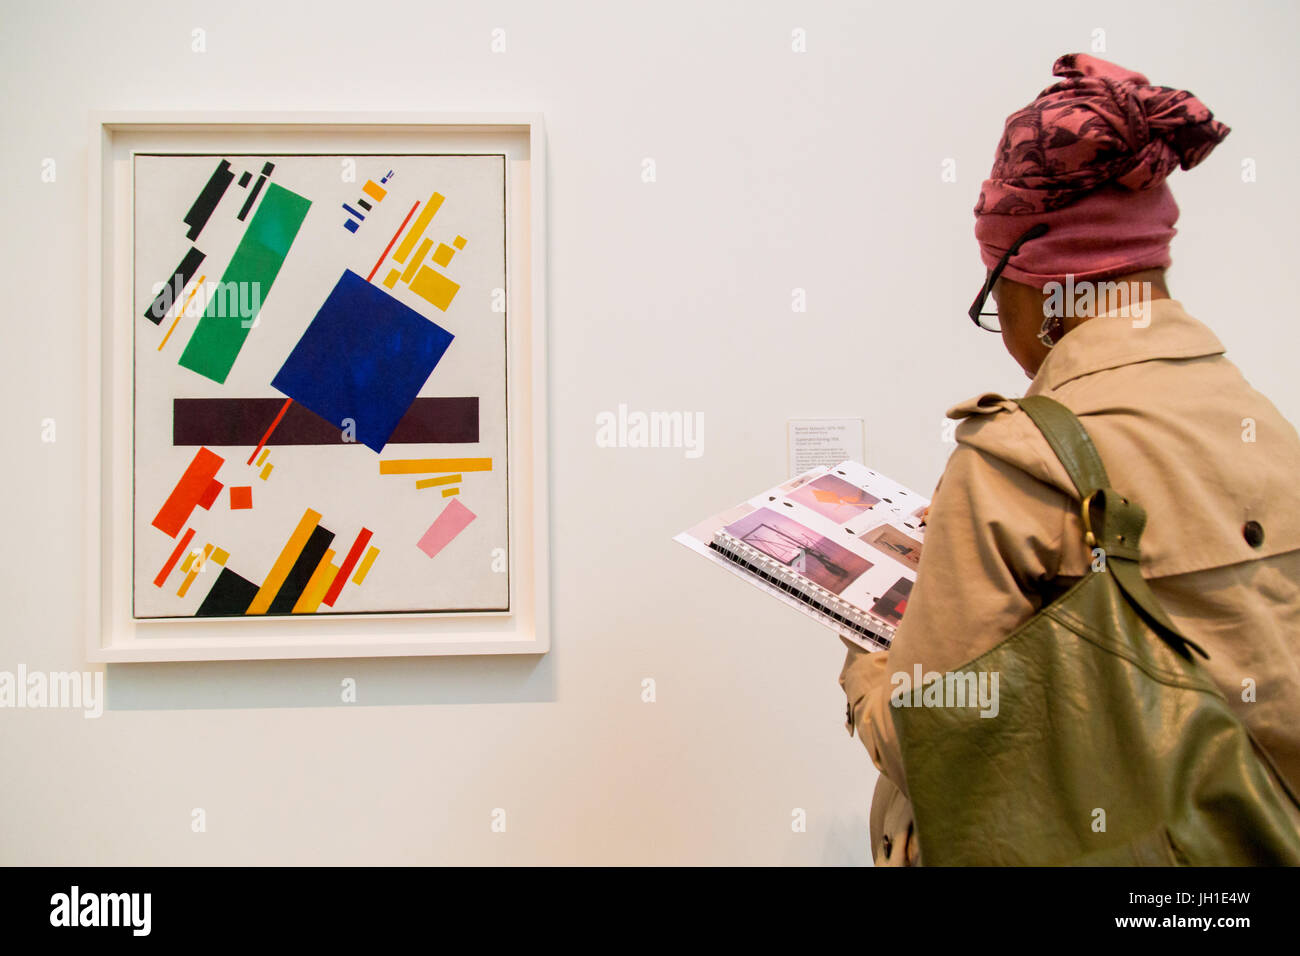 UK, London - 08 April 2015: Exposition in Tate Modern Gallery in London, UK. The gallery is located in the Bankside area of the London Borough of Southwark. Stock Photo